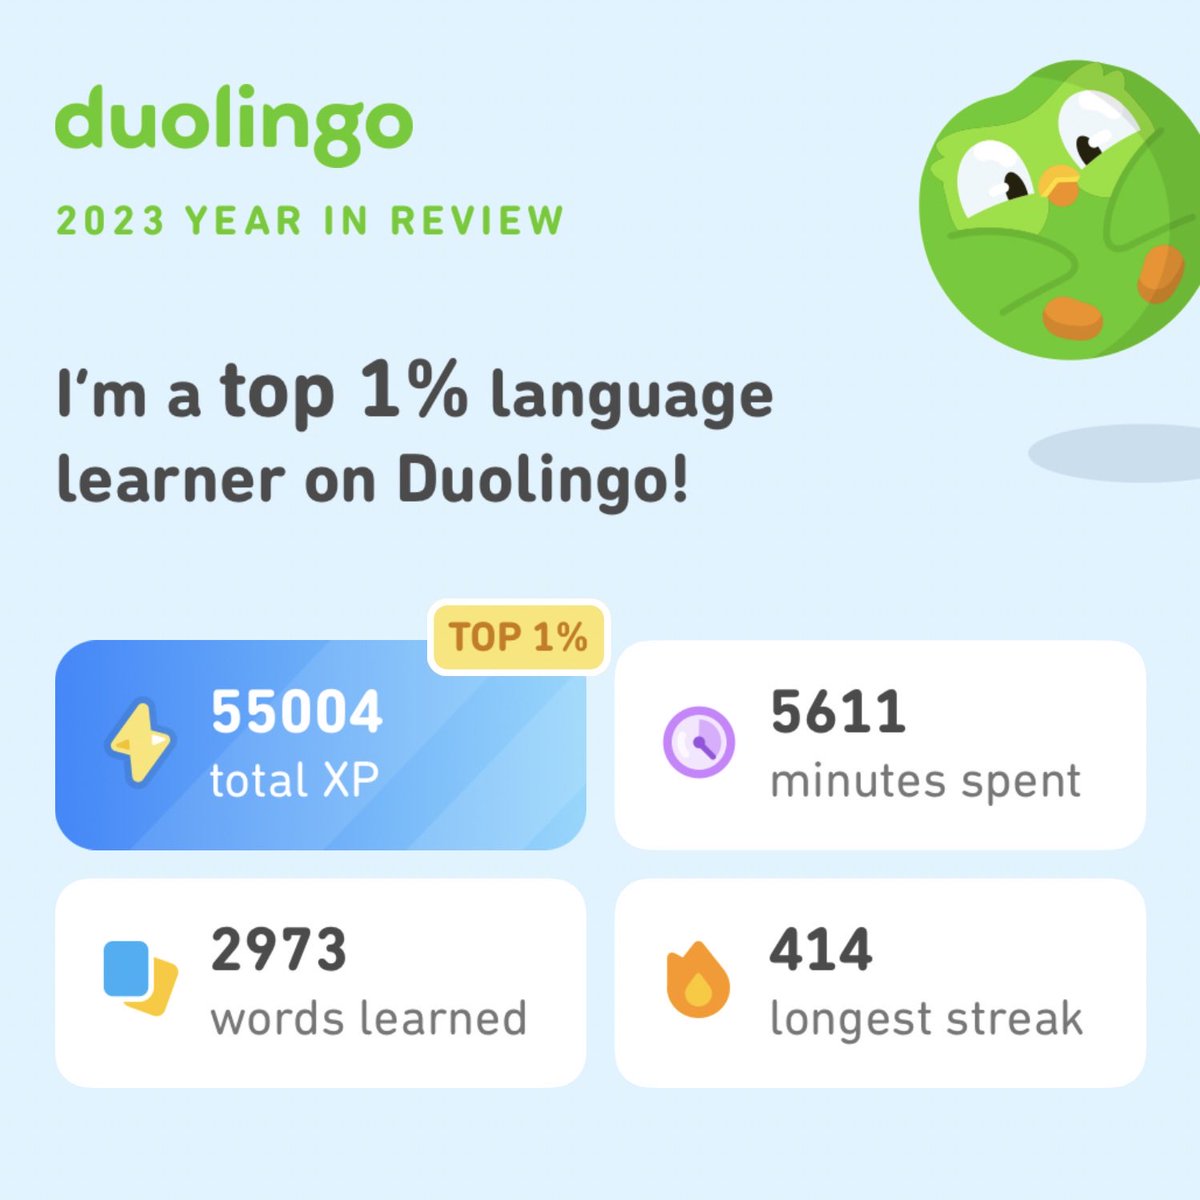 Look how much I learned on Duolingo in 2023! How did you do? #Duolingo365